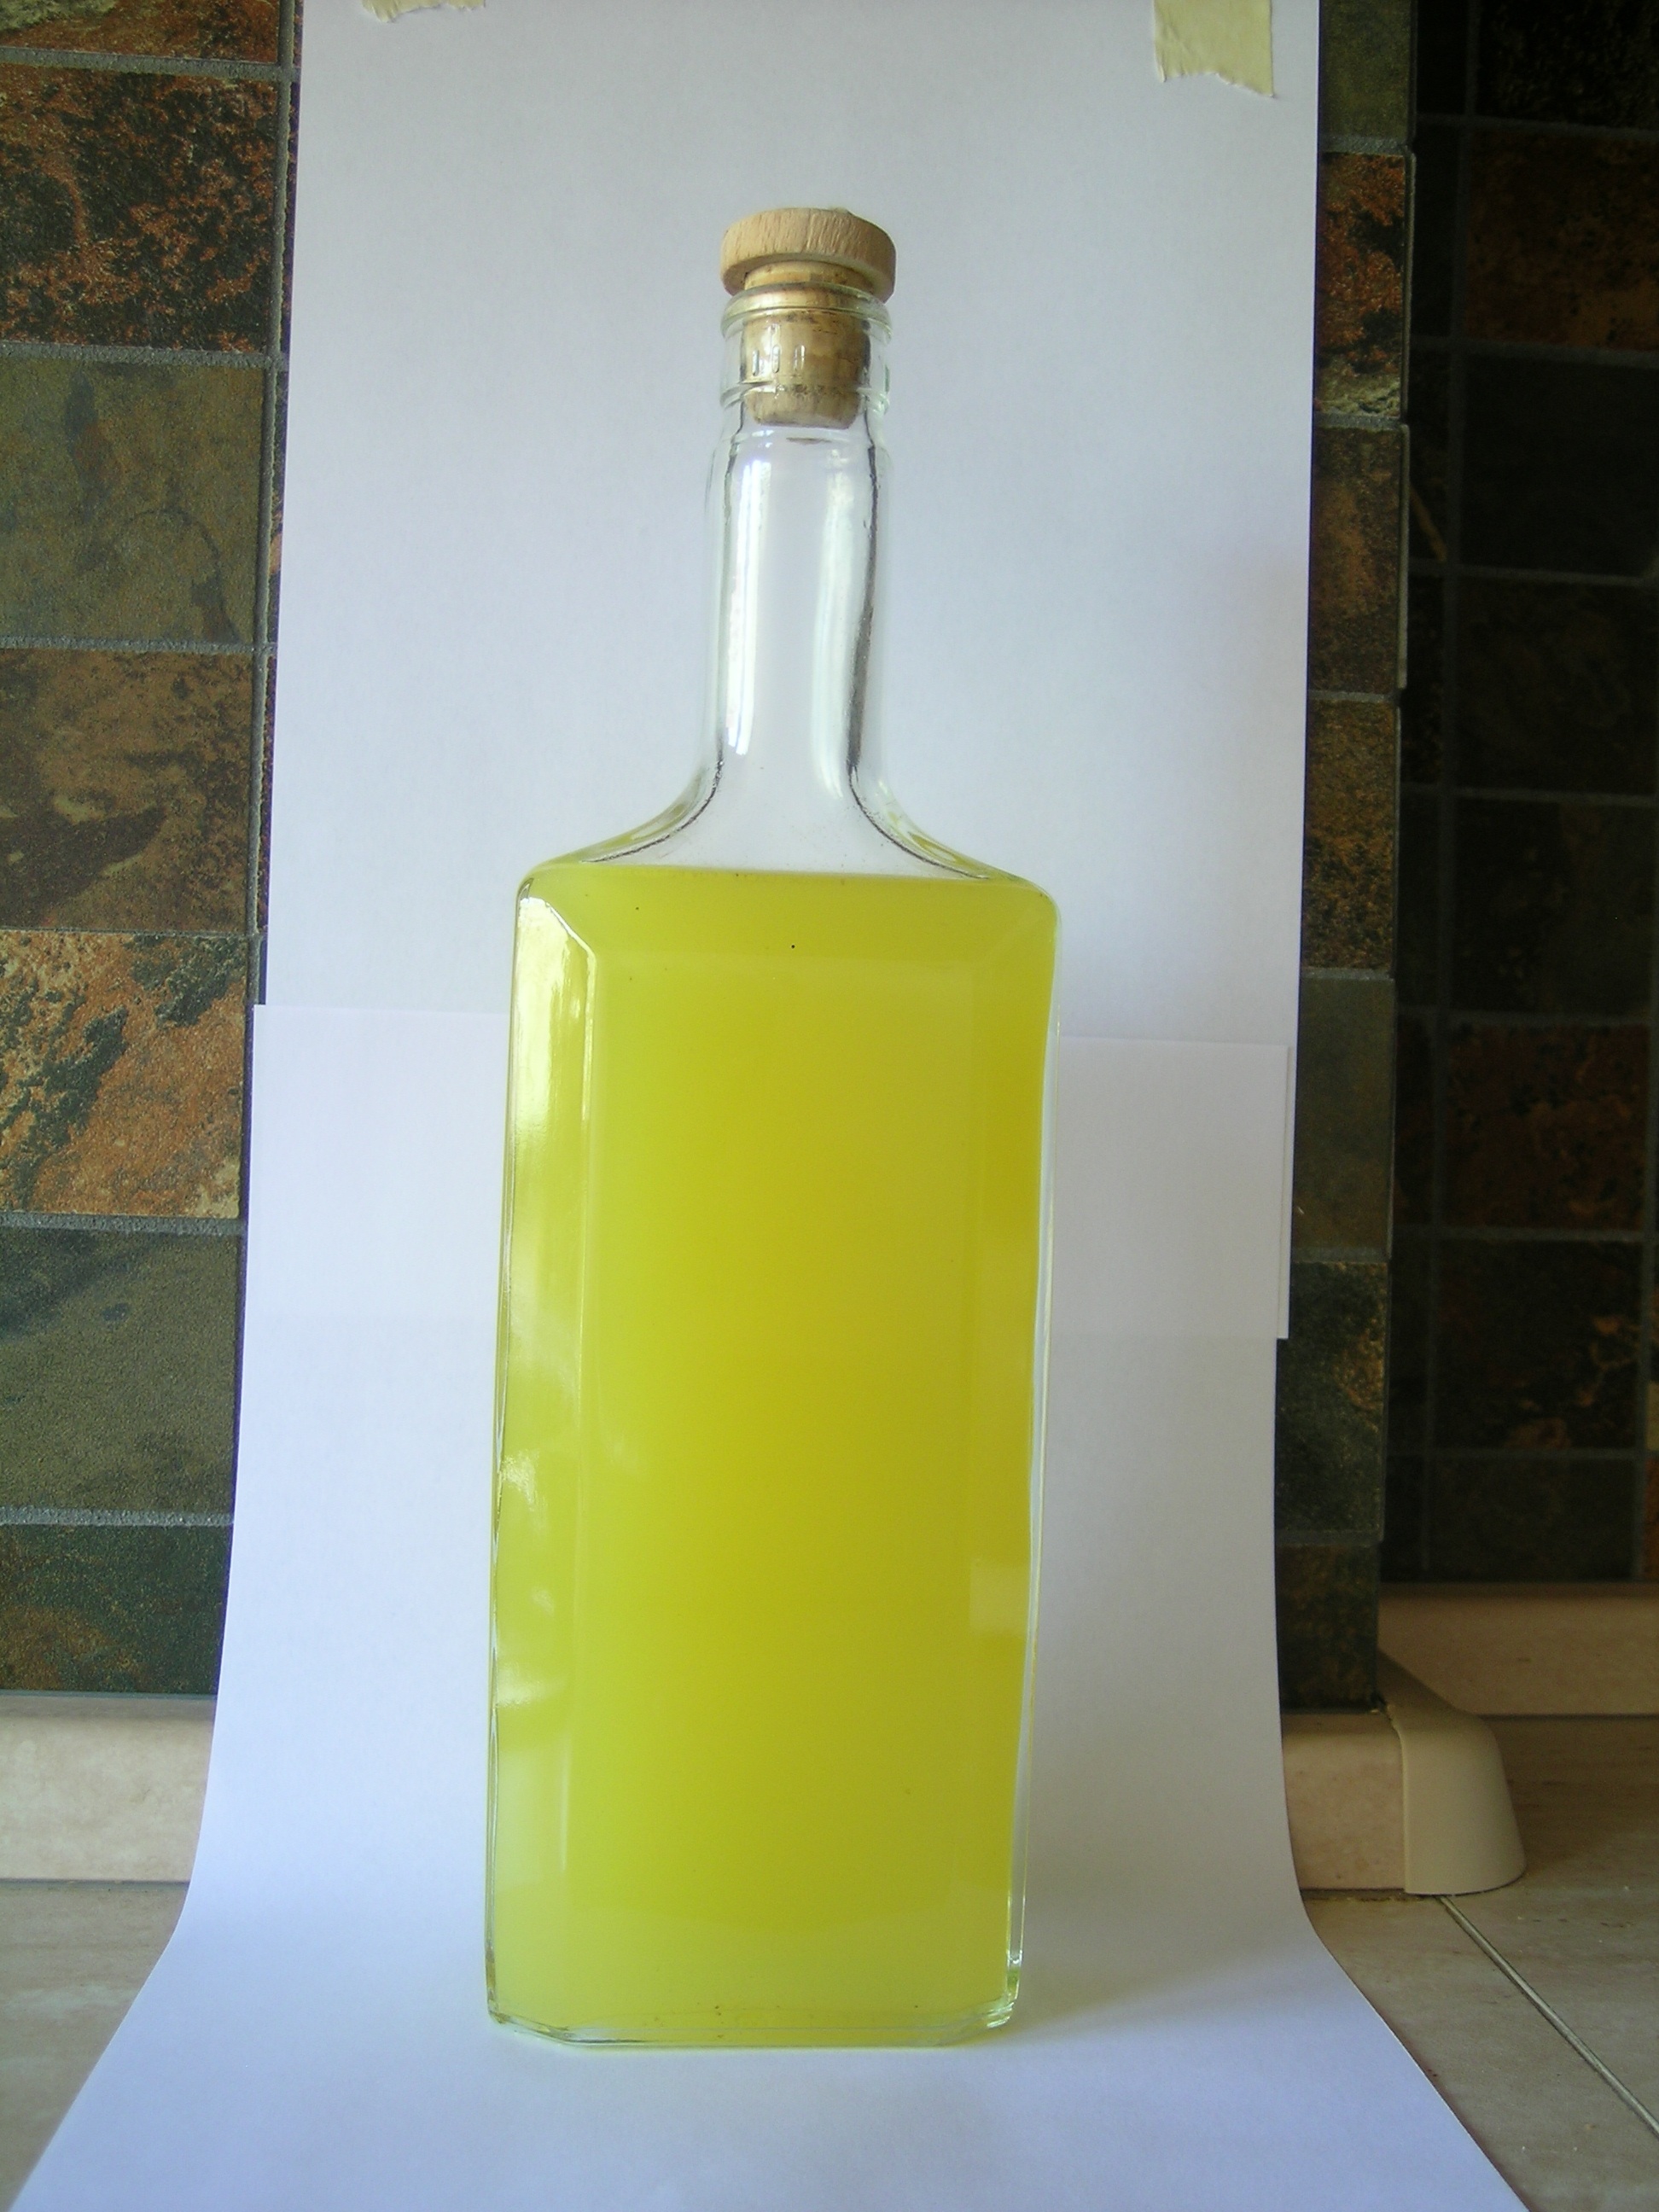 http://www.foodmakers.it/wp-content/uploads/2018/06/Homemade_limoncello_original.jpg